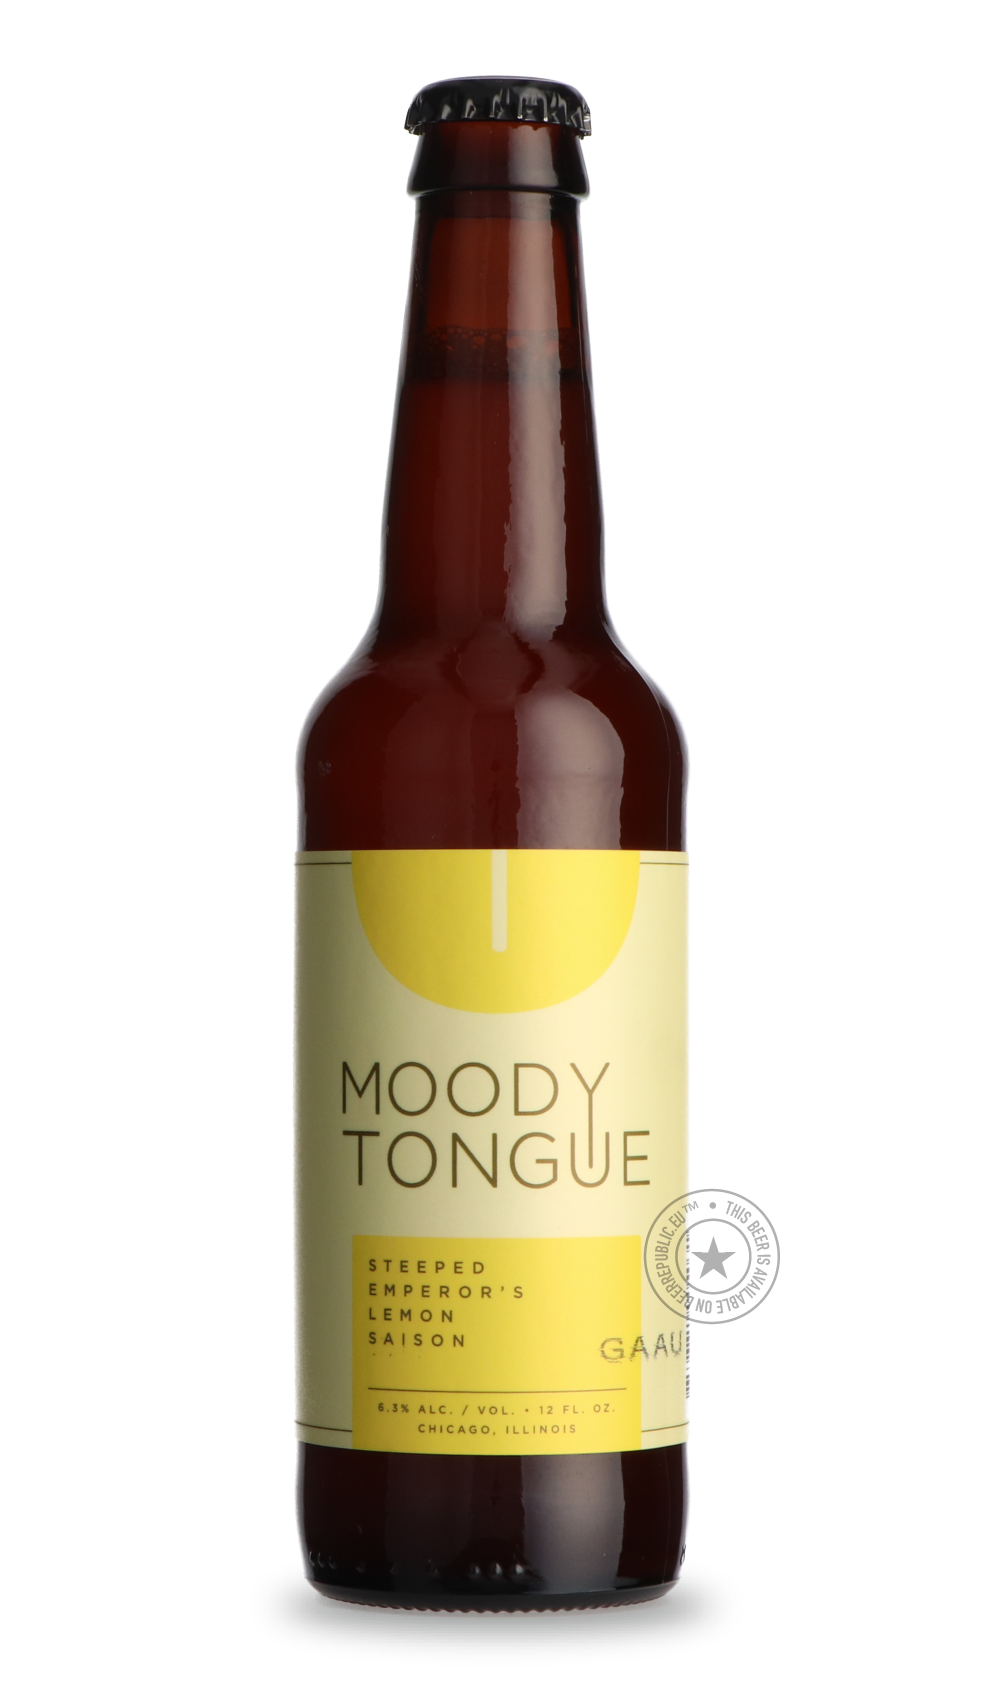 -Moody Tongue- Steeped Emperor's Lemon Saison-Pale- Only @ Beer Republic - The best online beer store for American & Canadian craft beer - Buy beer online from the USA and Canada - Bier online kopen - Amerikaans bier kopen - Craft beer store - Craft beer kopen - Amerikanisch bier kaufen - Bier online kaufen - Acheter biere online - IPA - Stout - Porter - New England IPA - Hazy IPA - Imperial Stout - Barrel Aged - Barrel Aged Imperial Stout - Brown - Dark beer - Blond - Blonde - Pilsner - Lager - Wheat - Wei